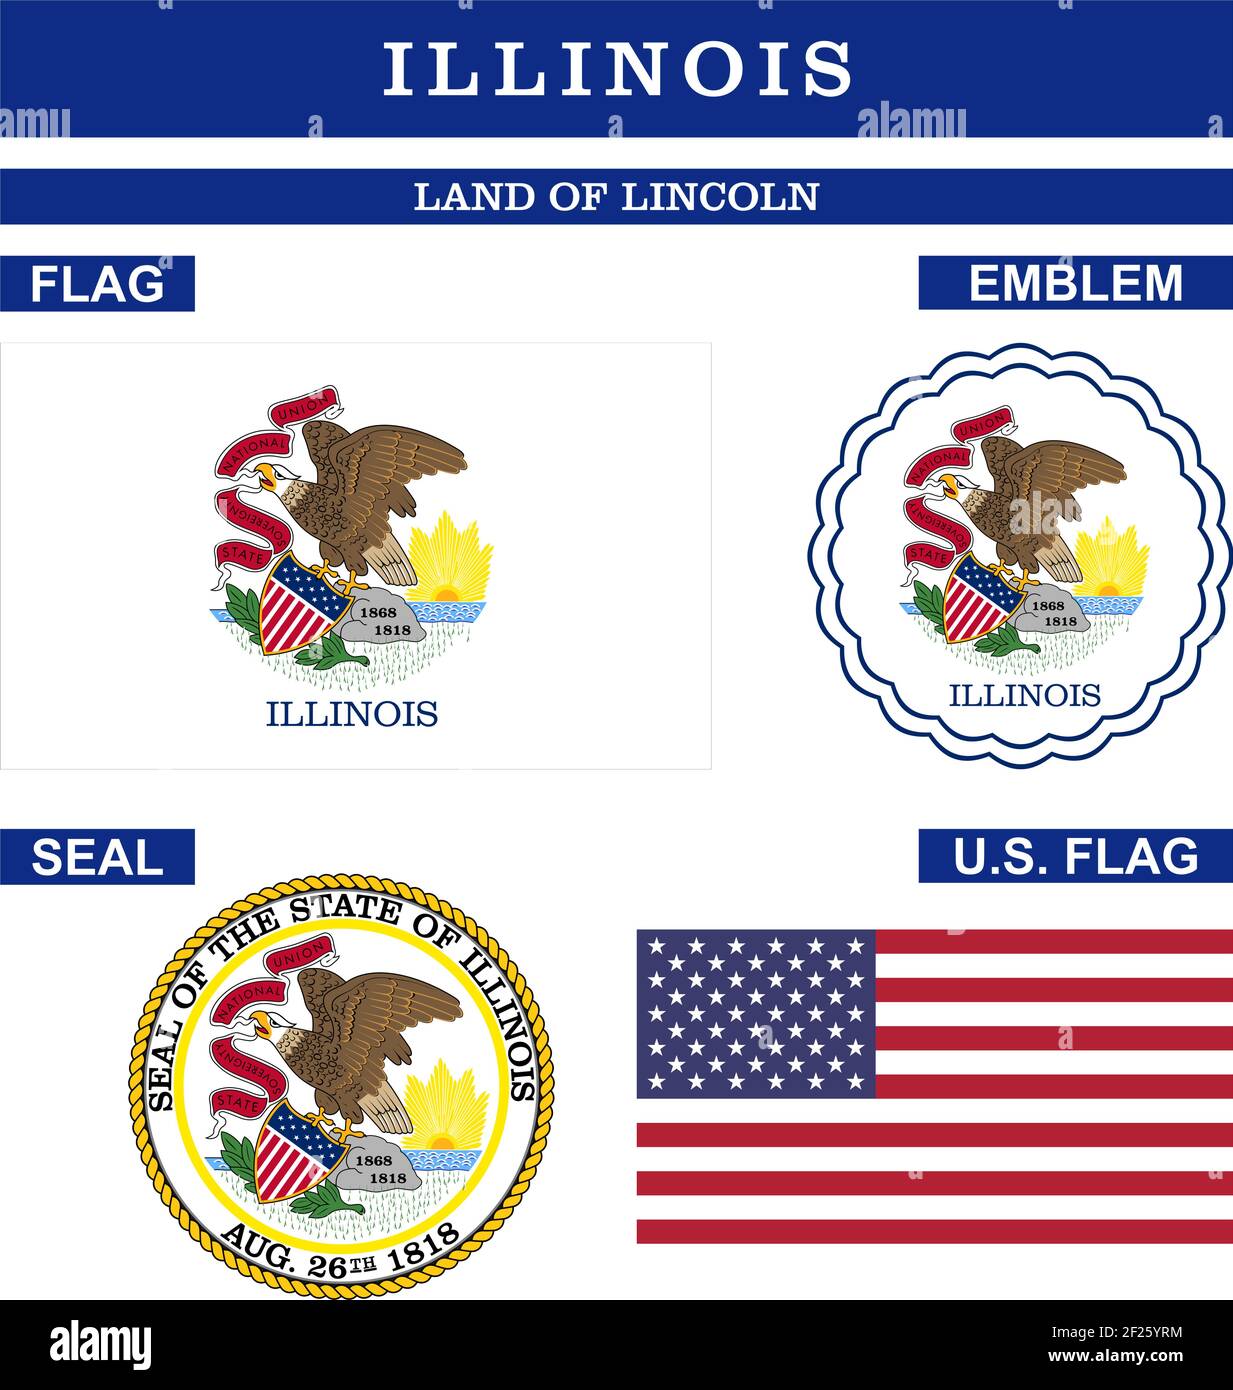 Illinois Symbol collection with flag, seal, US flag and emblem as vector. Land of Lincoln. Stock Vector